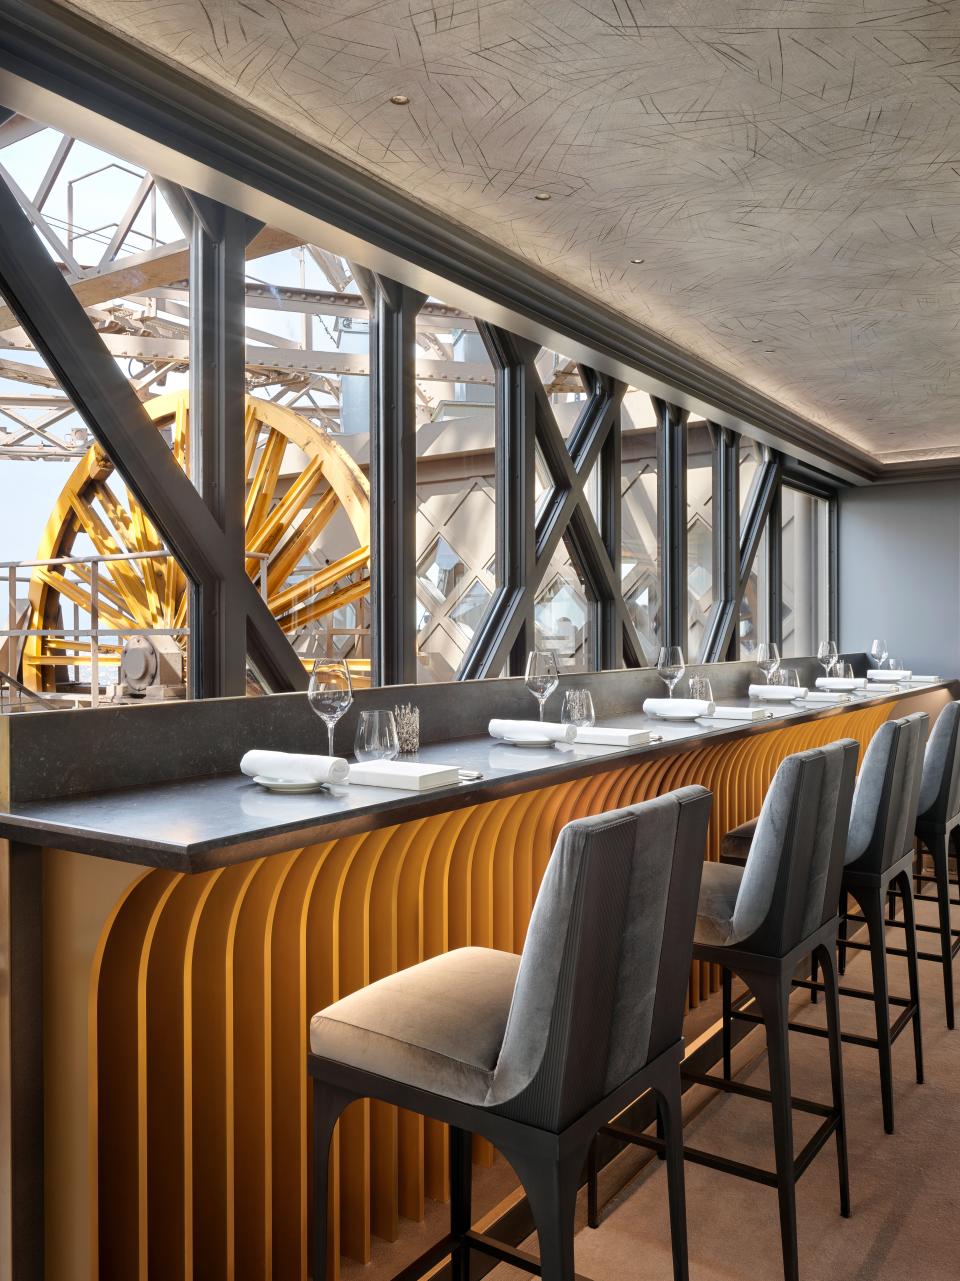 A newly installed bar offers diners a front-row seat to view the tower's mechanical wheels and the City of Light beyond.